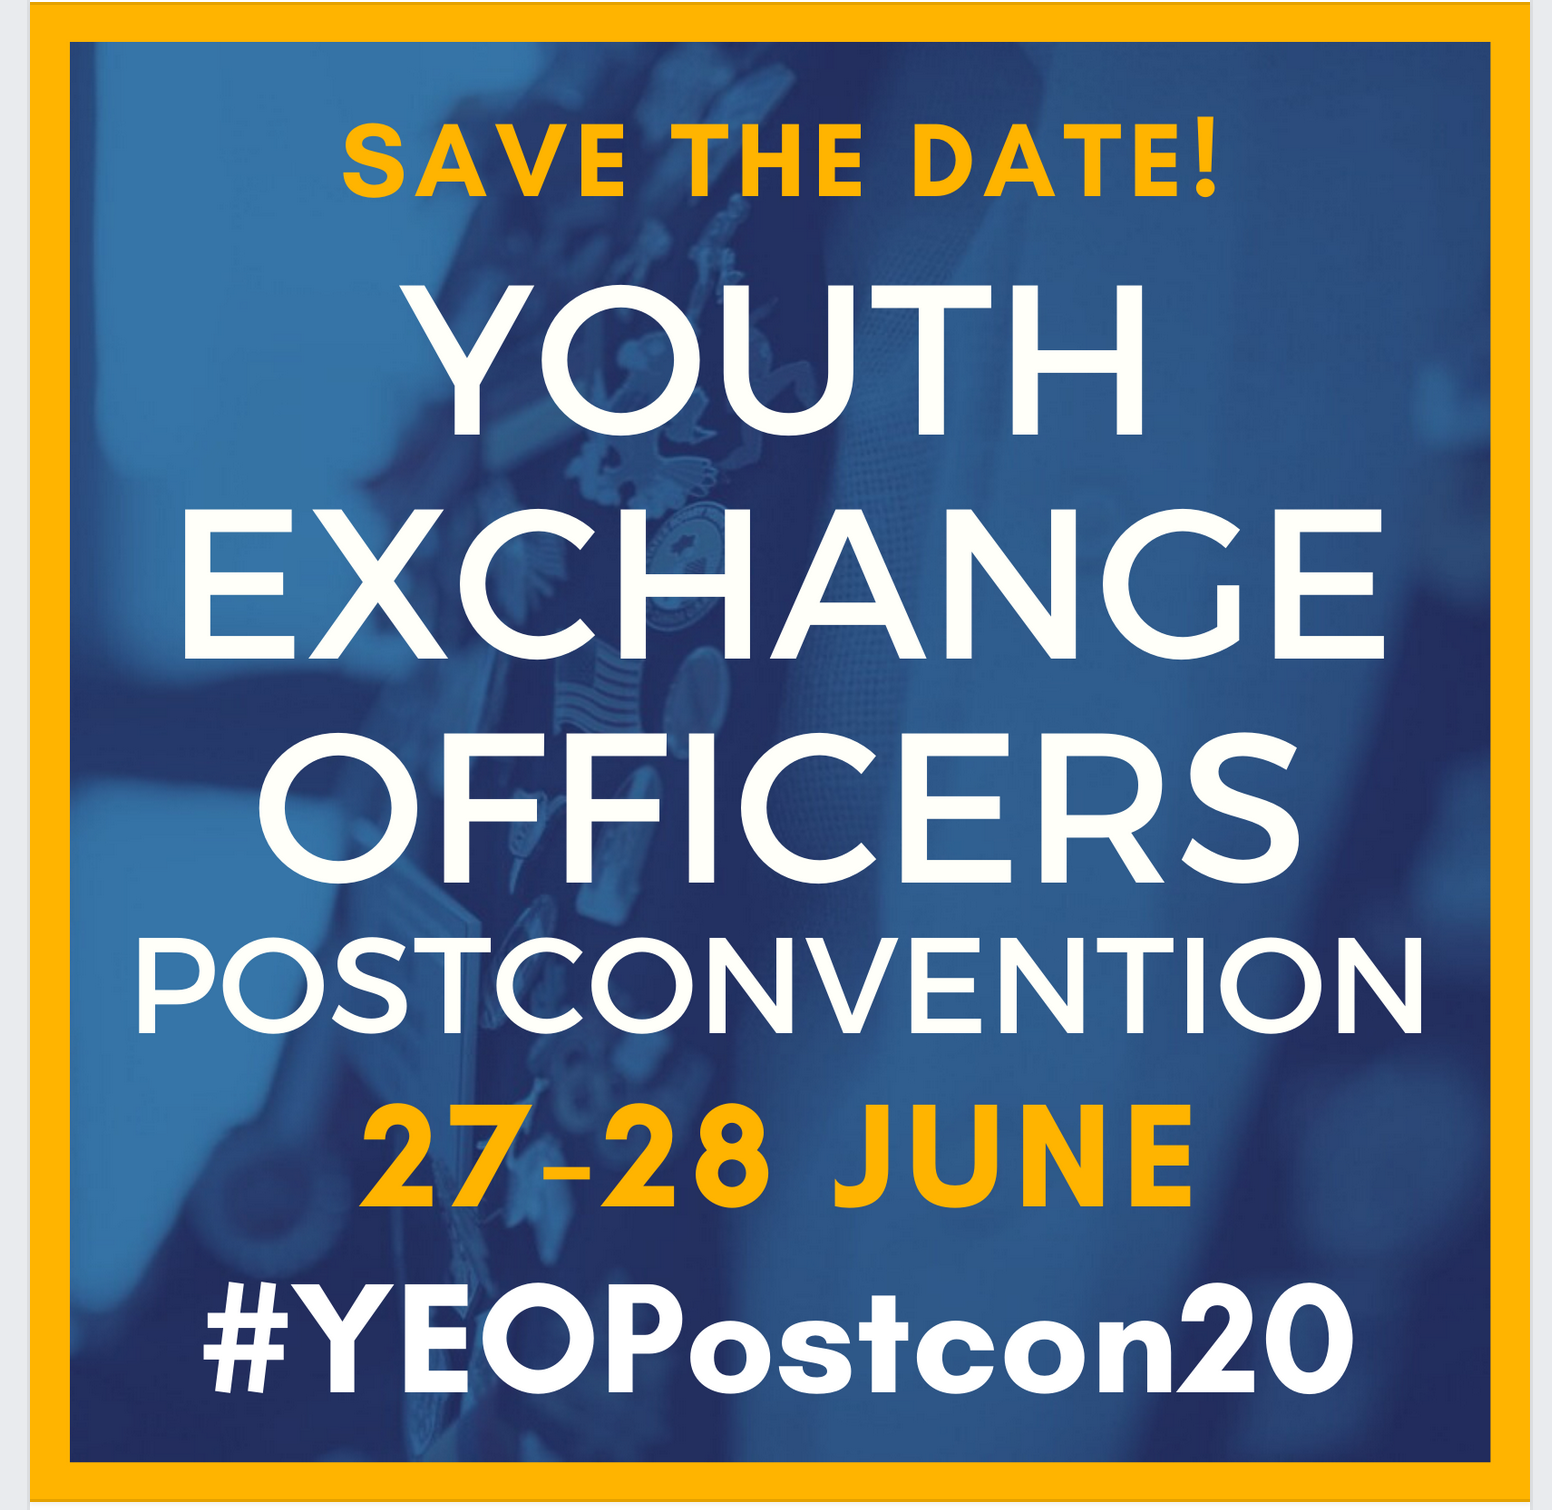 2020, youth exchange officers, yeopostccon20